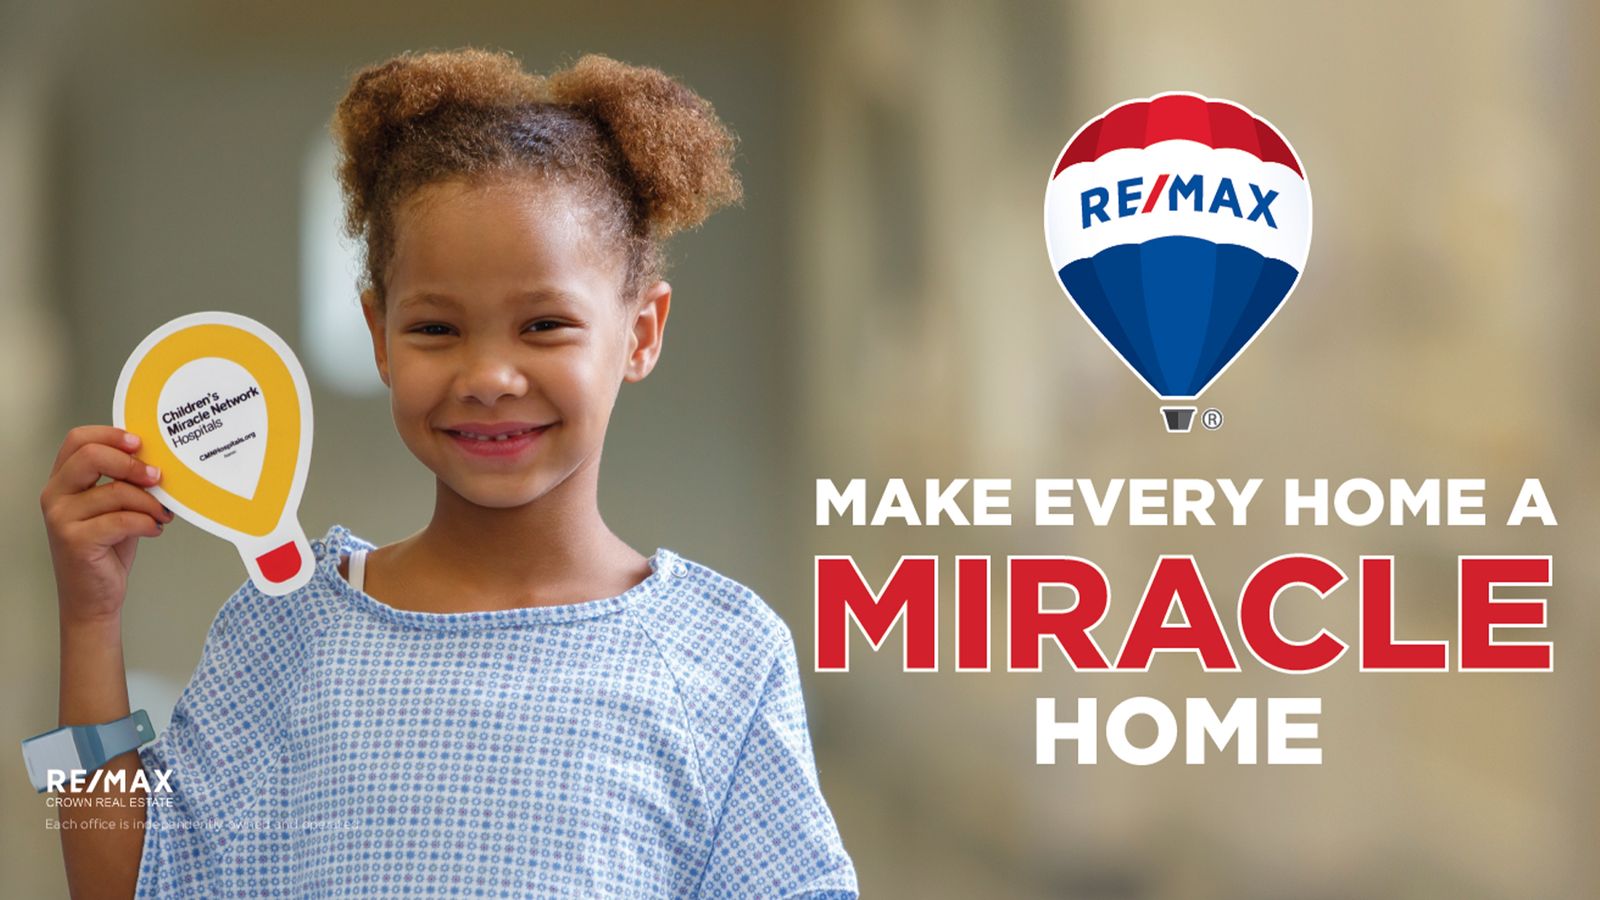 RE/MAX Cares: The Miracle Home Program